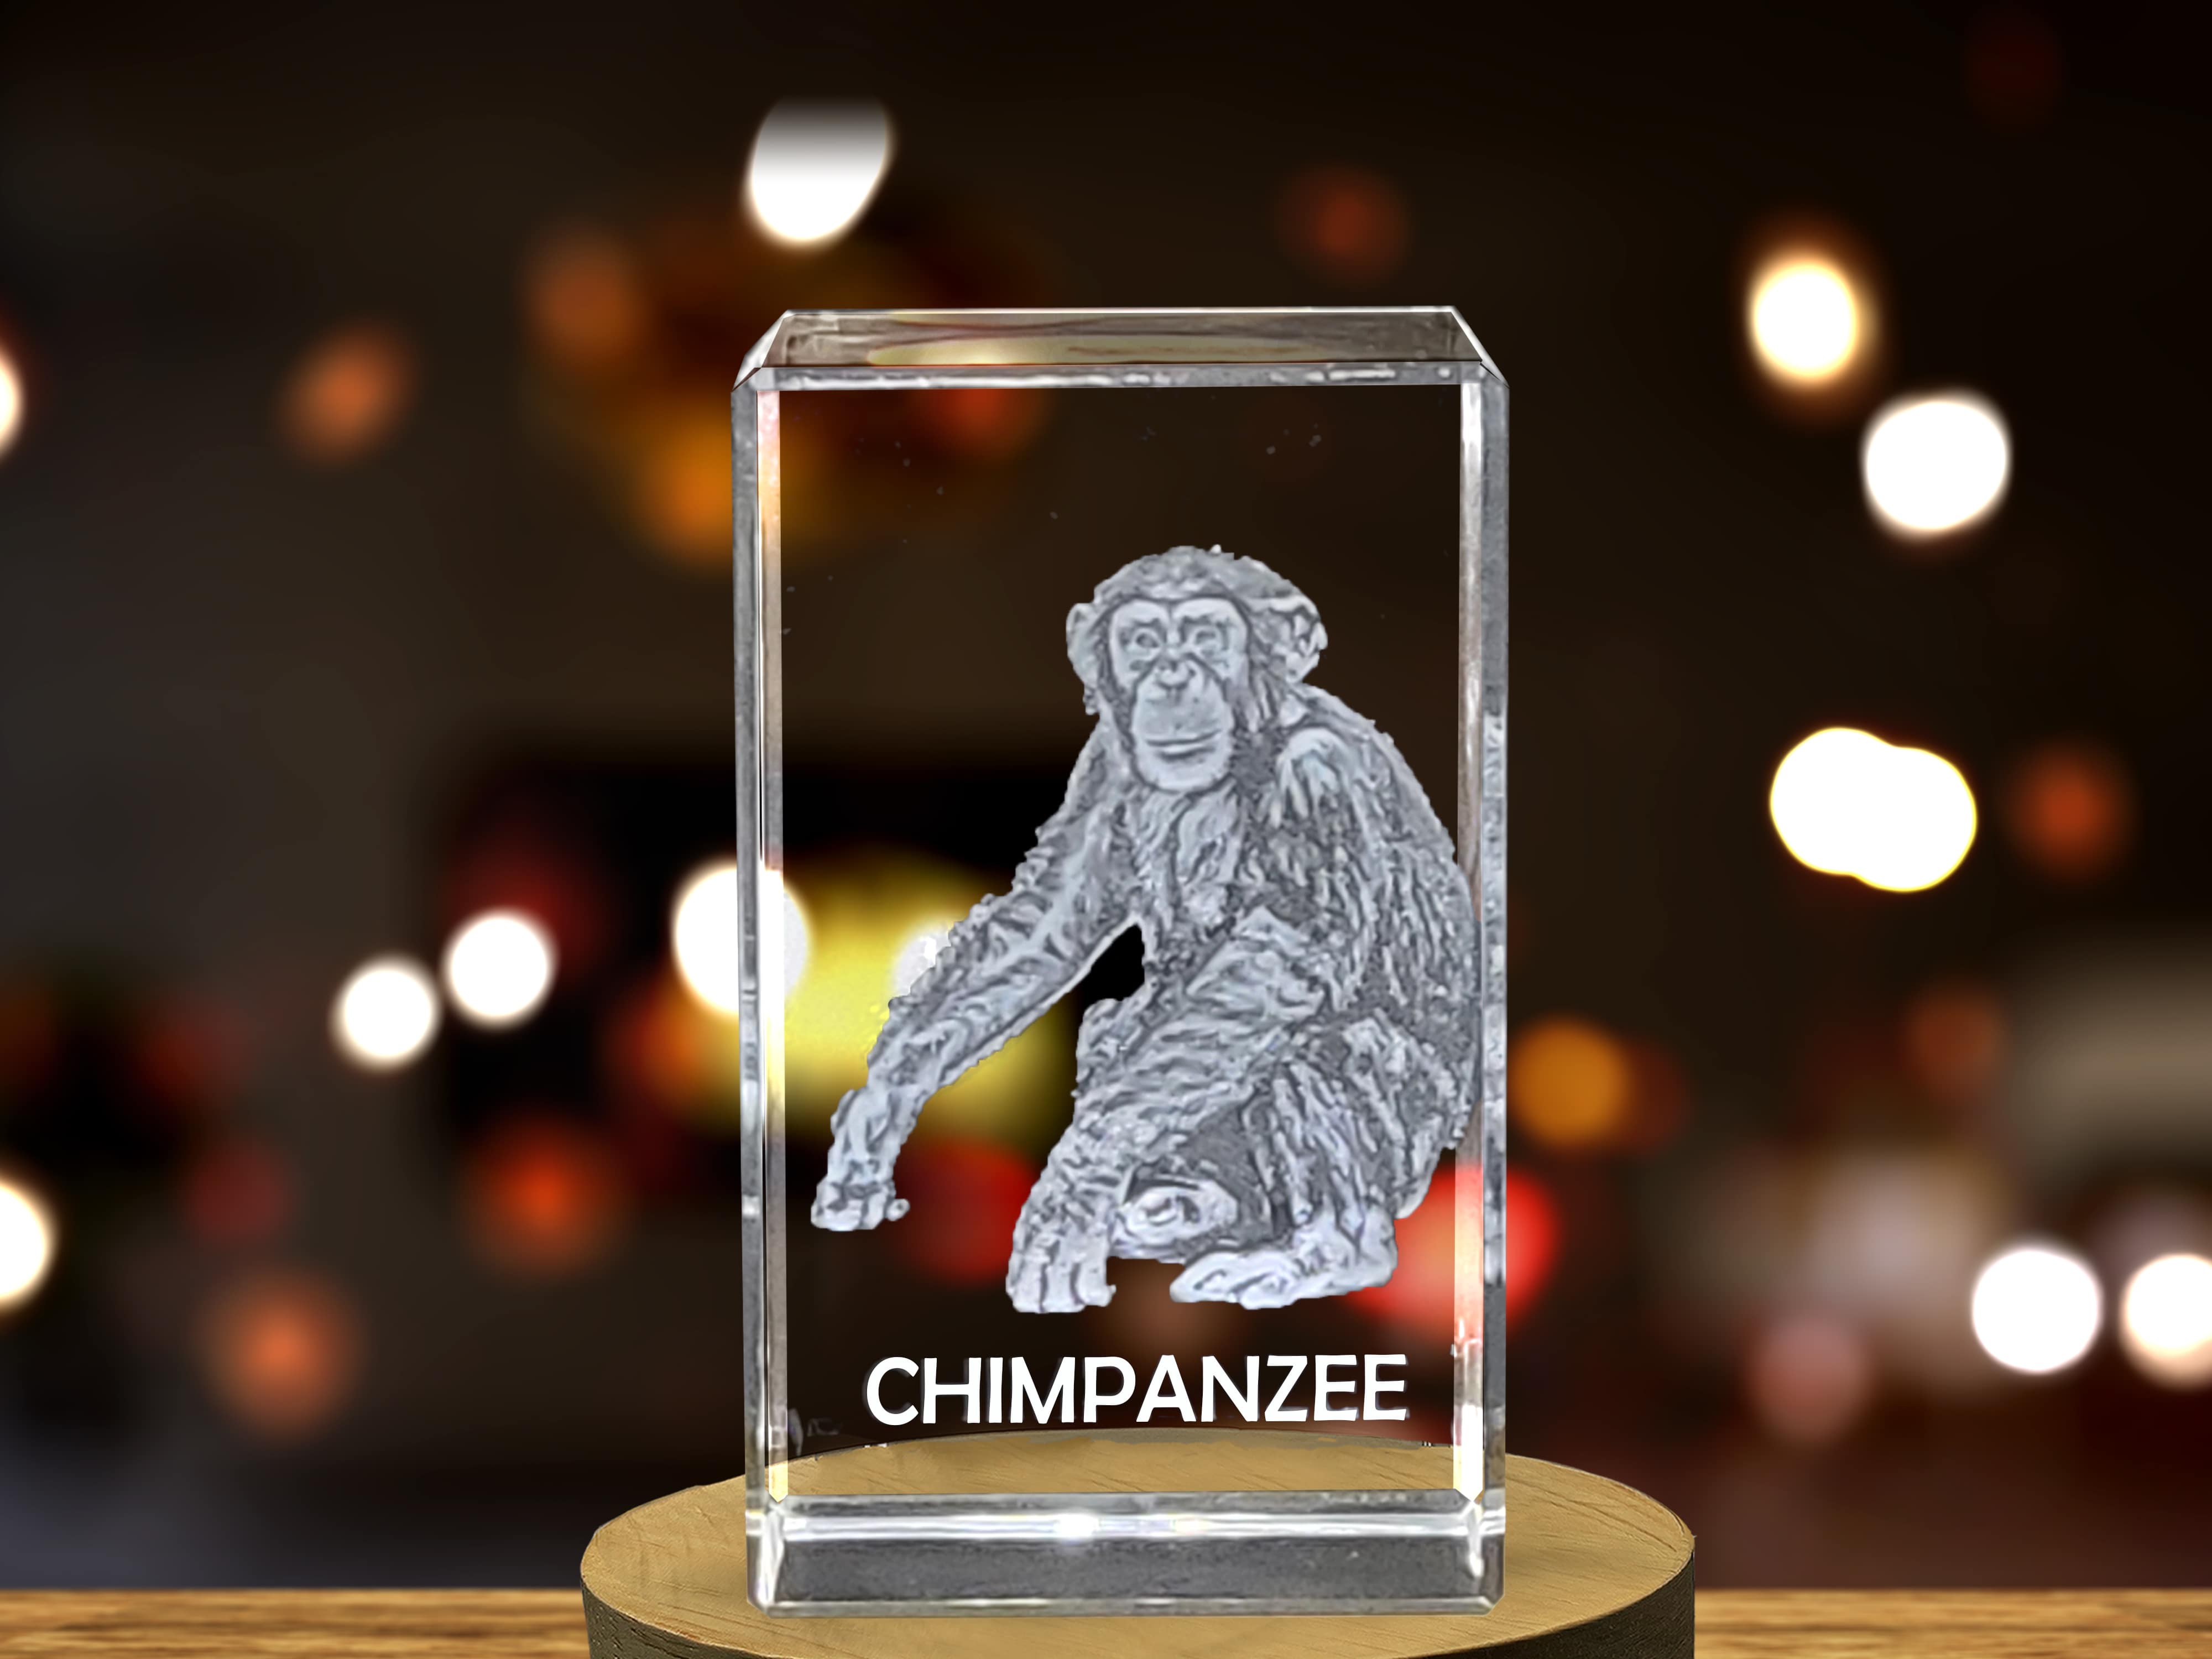 Captivating 3D Engraved Crystal of a Playful Chimpanzee - Perfect for Animal Lovers and Nature Enthusiasts A&B Crystal Collection